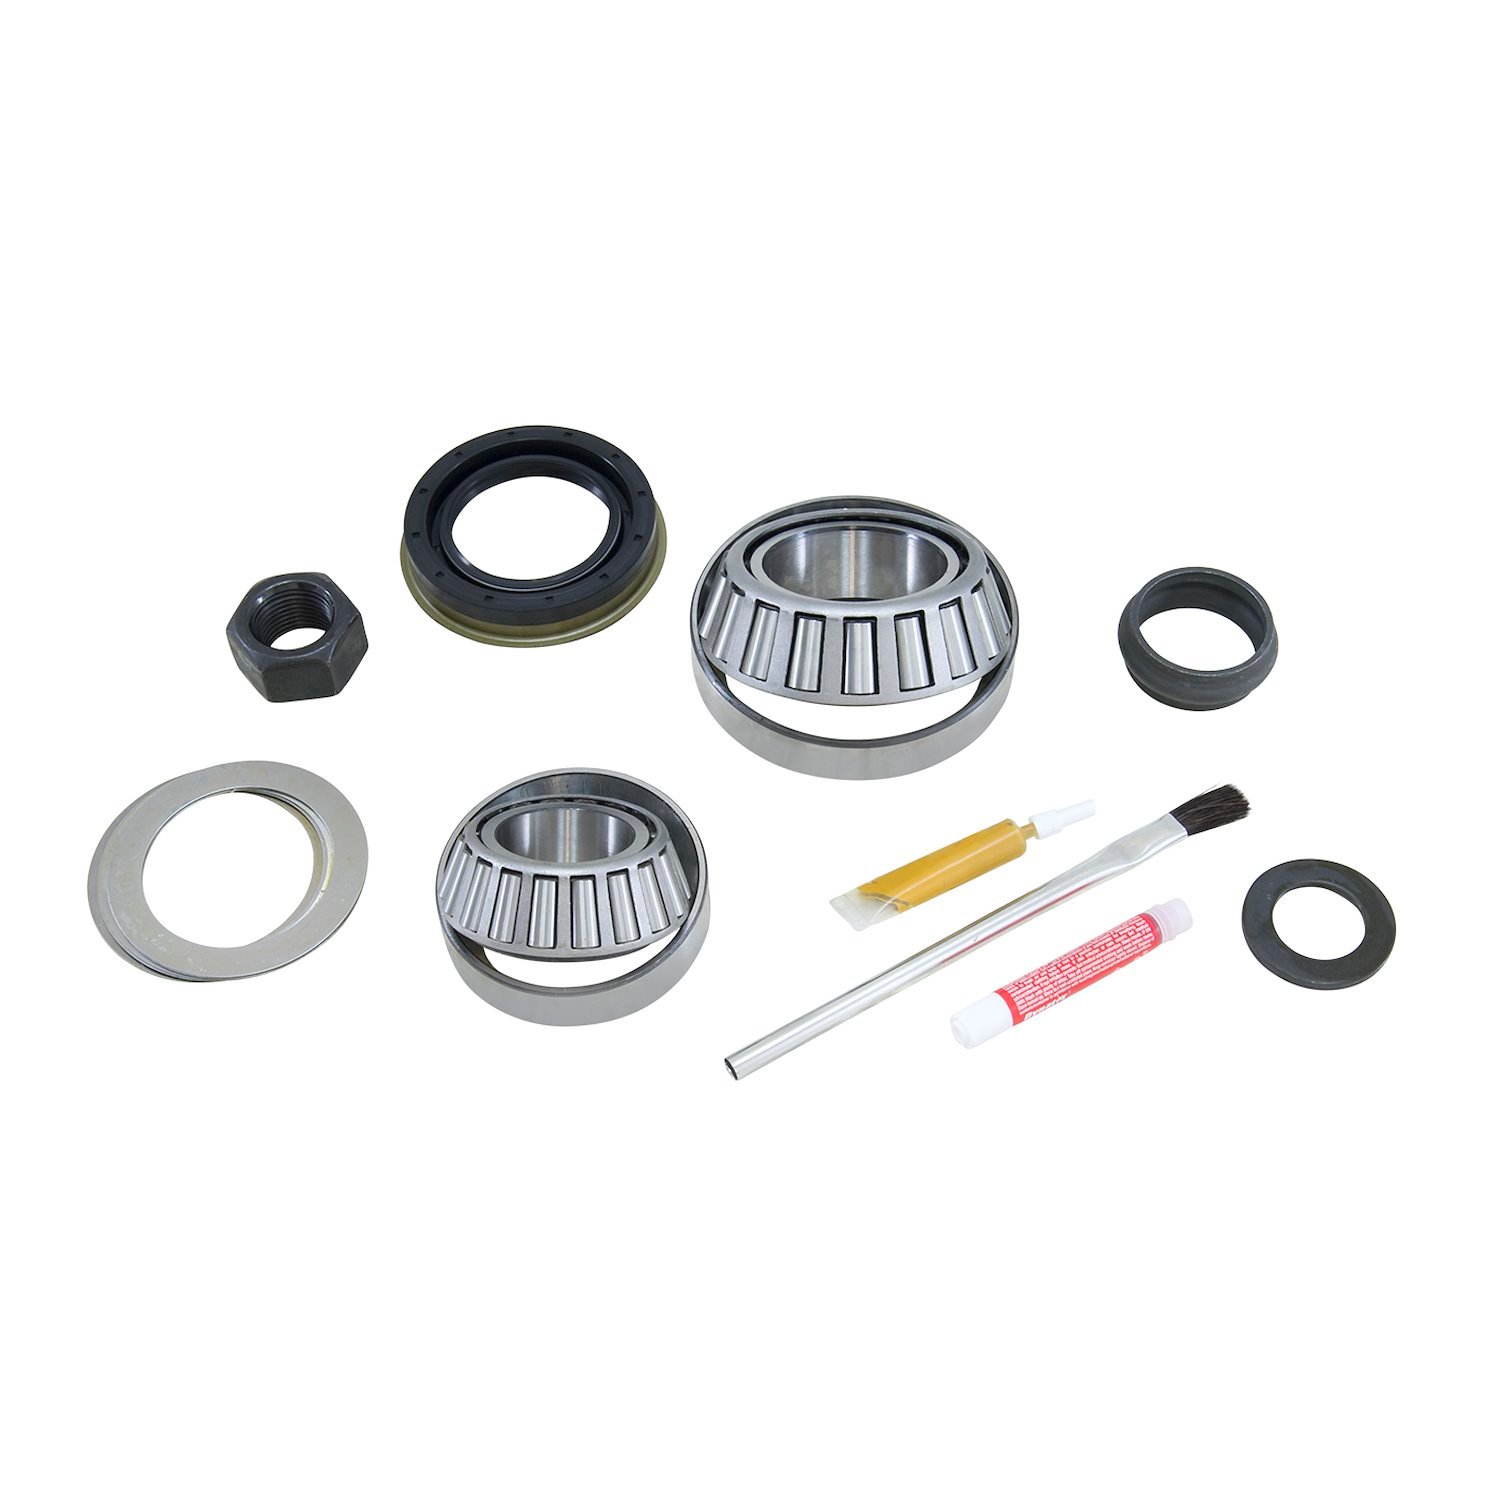 Pinion Install Kit For Dana 80 Differential (4.375 in. Od Only).